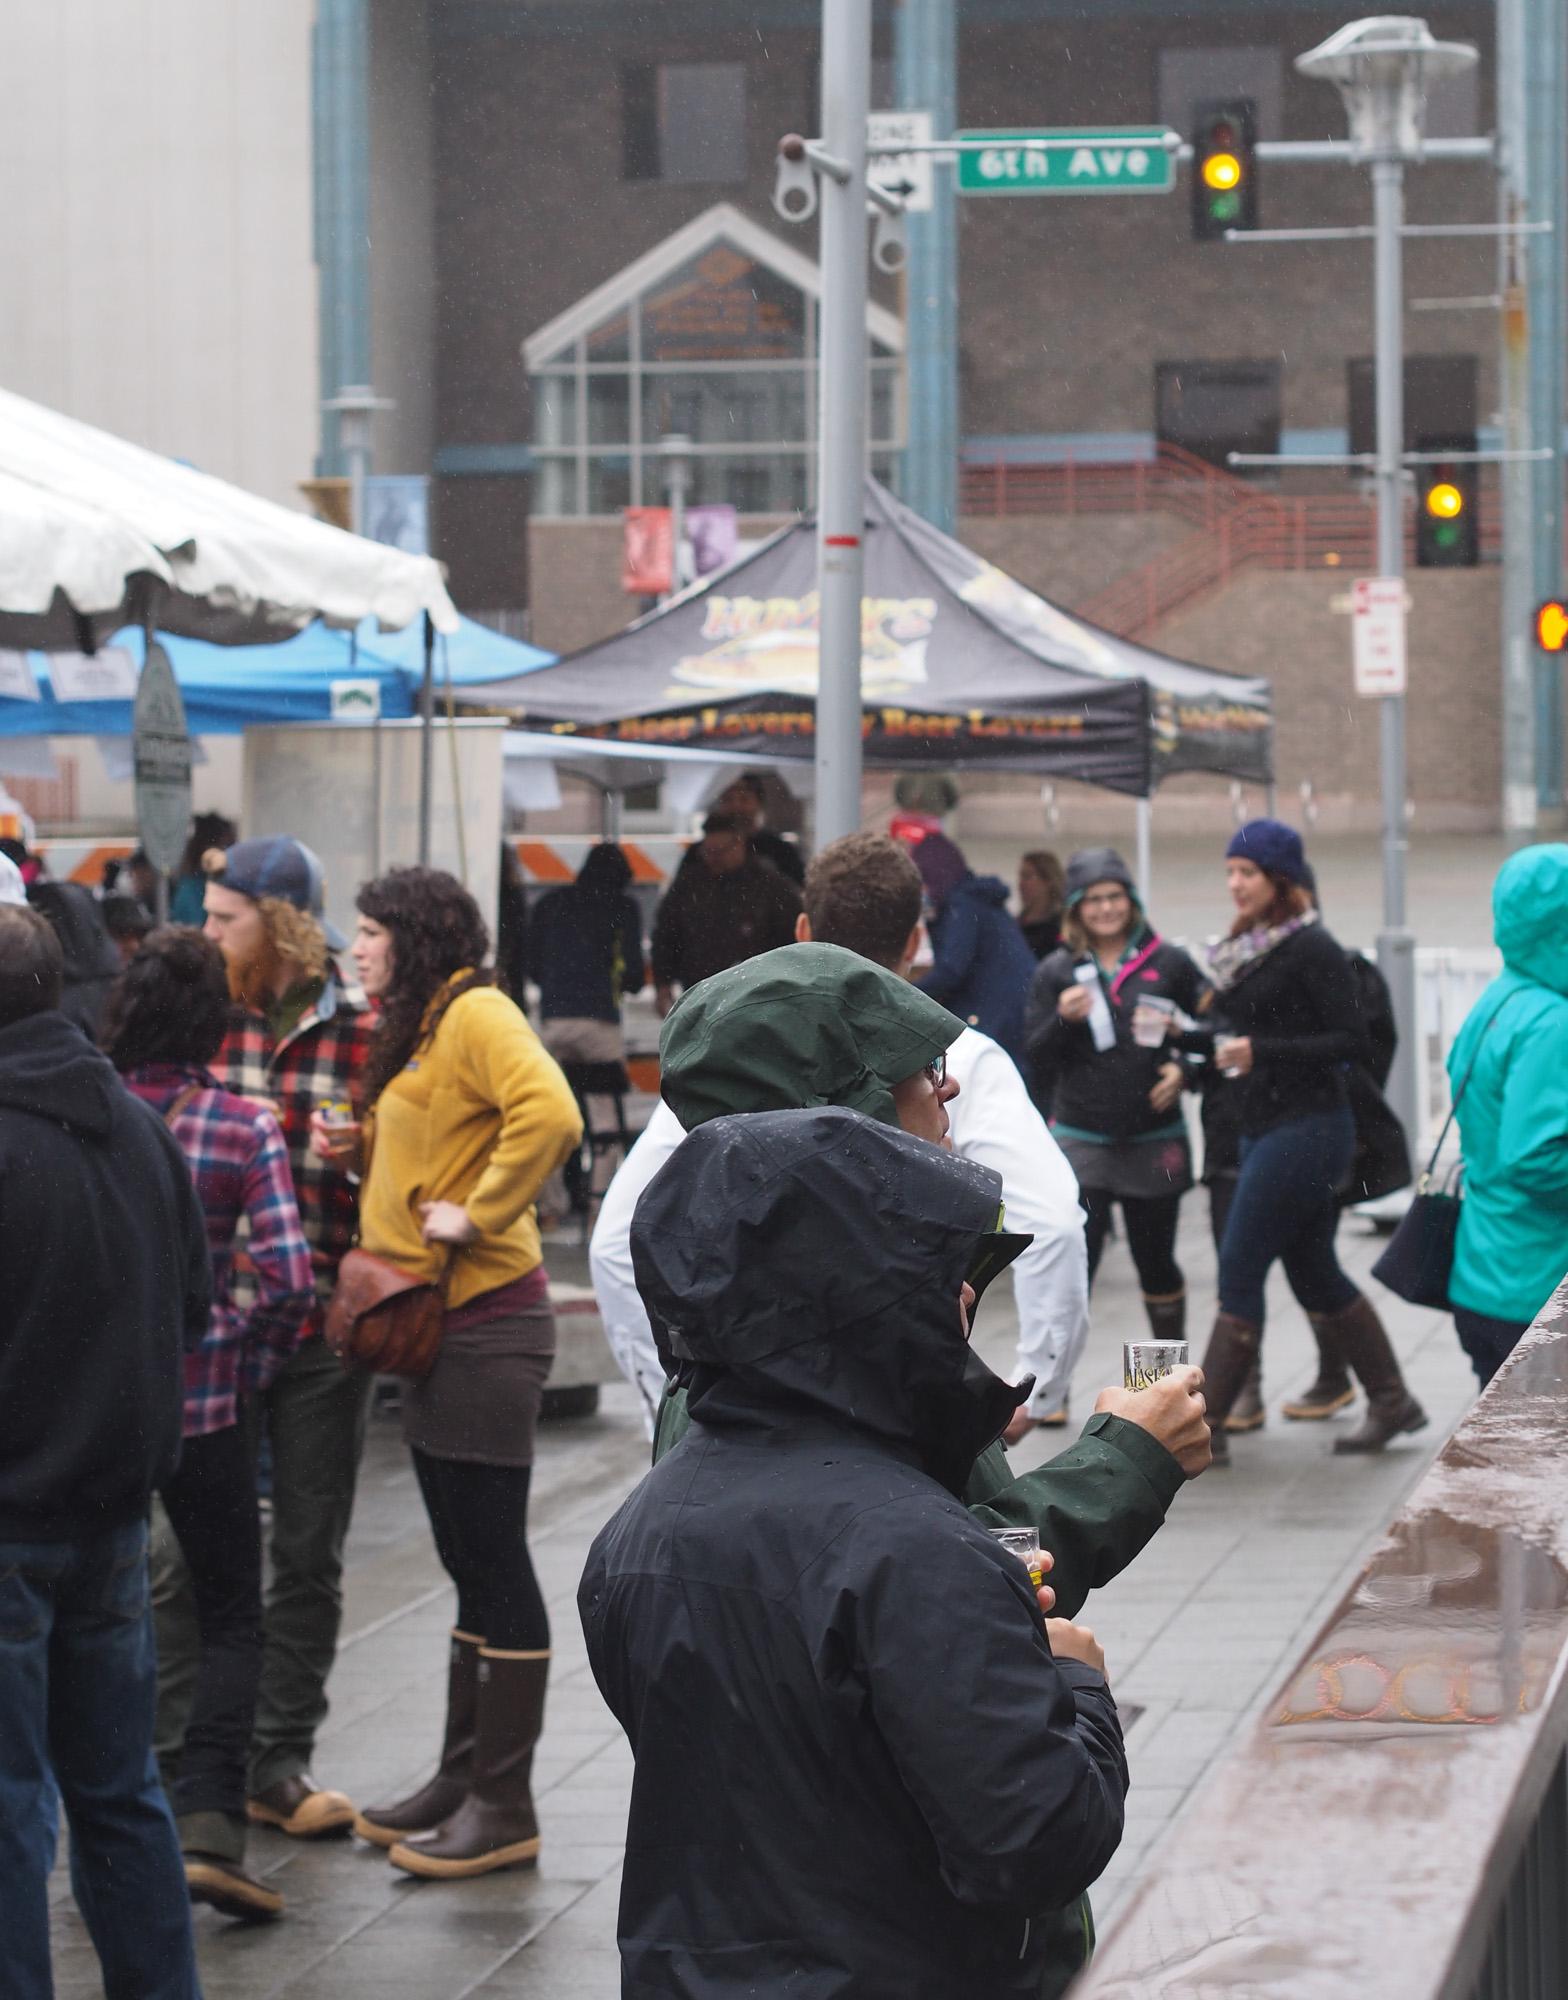 Patrons at the Alaska Crafted Festival enduring the rain and wind during the Saturday event in downtown Anchorage. (Photo by Zachariah Hughes, Alaska Public Media - Anchorage)